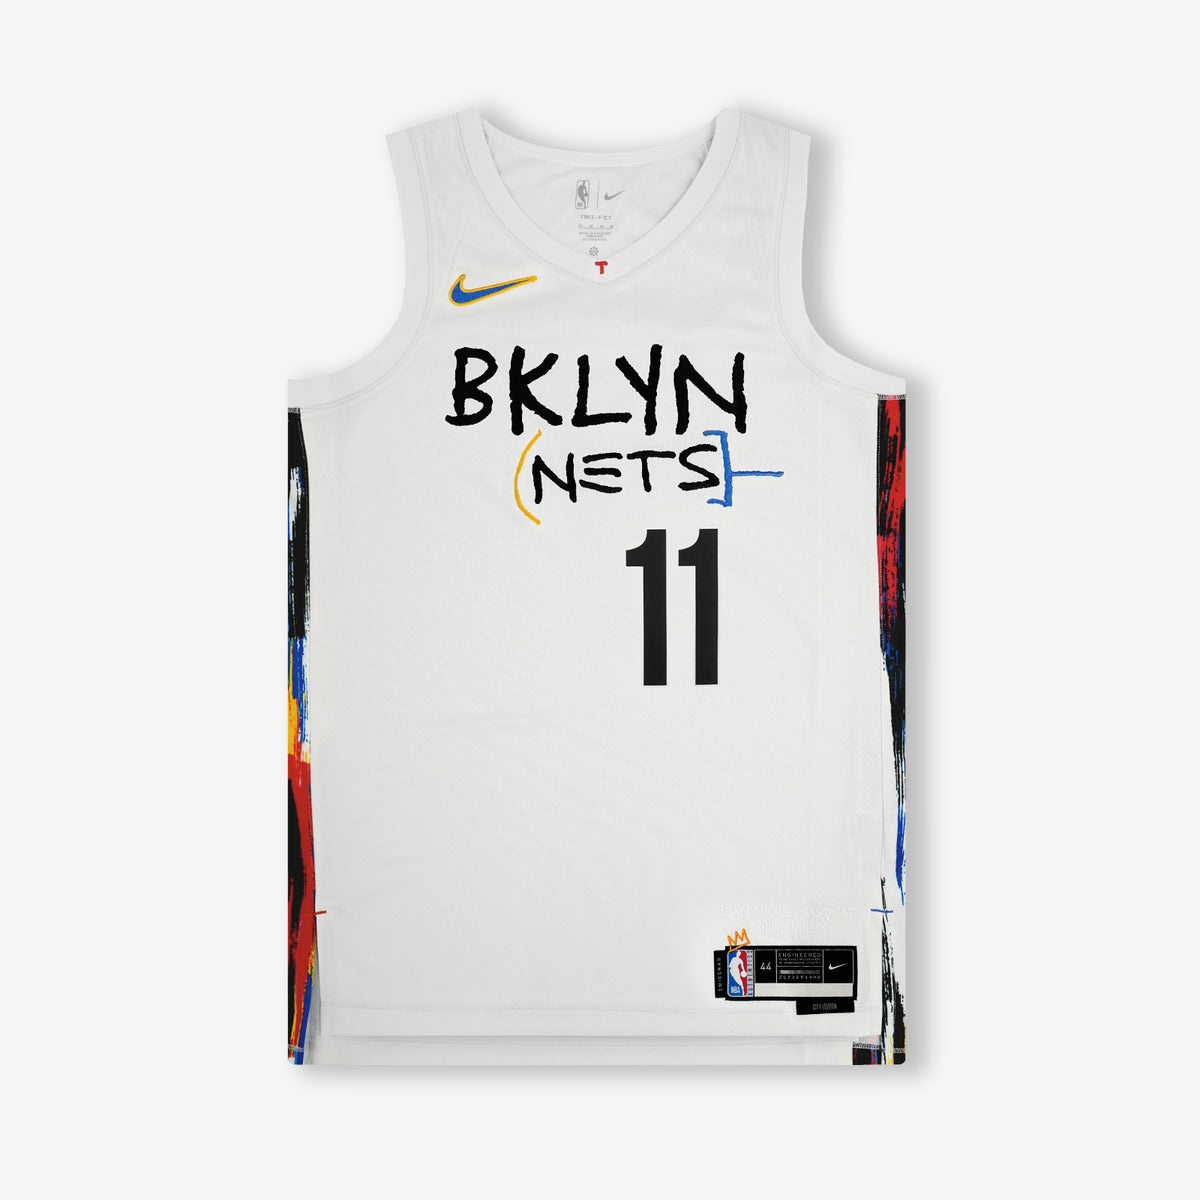 kyrie irving nets throwback jersey